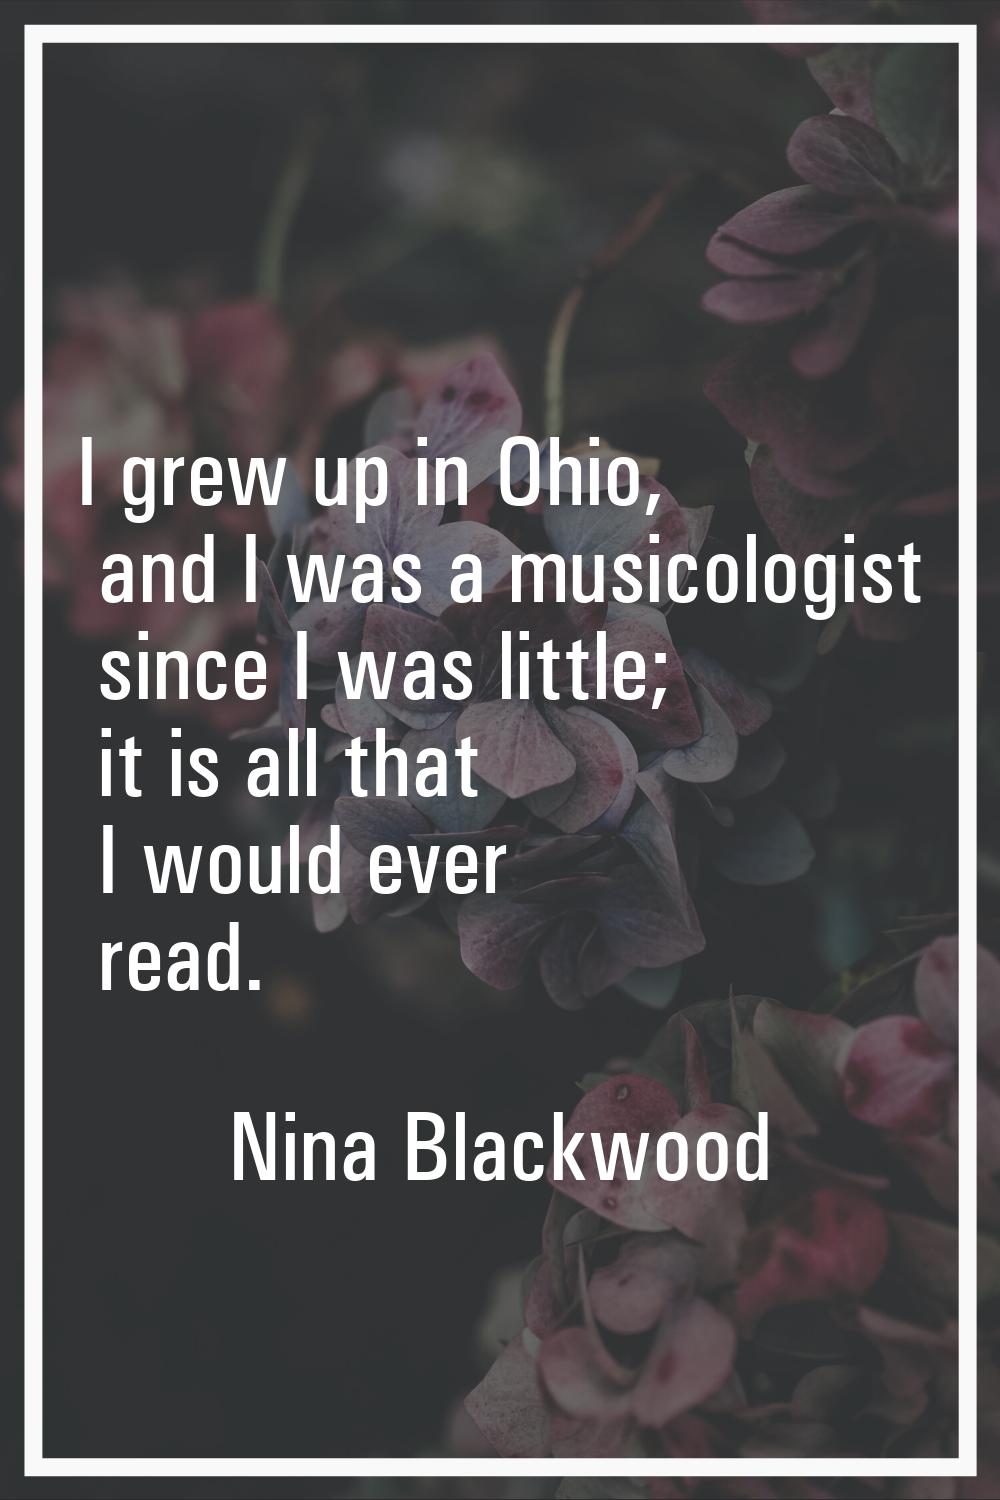 I grew up in Ohio, and I was a musicologist since I was little; it is all that I would ever read.